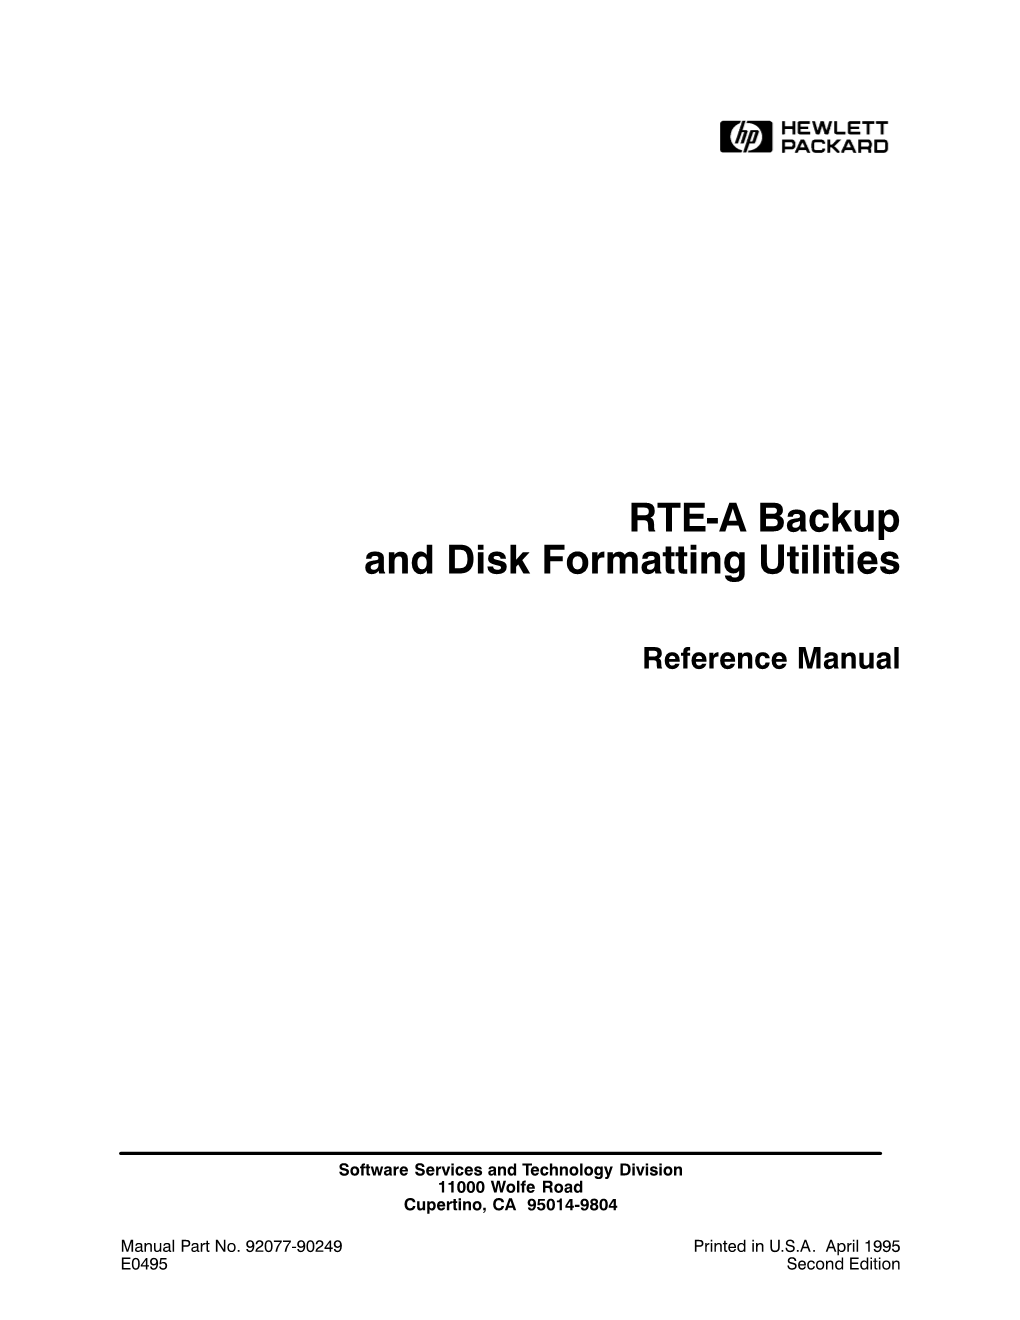 RTE a Backup and Disk Formatting Utilities